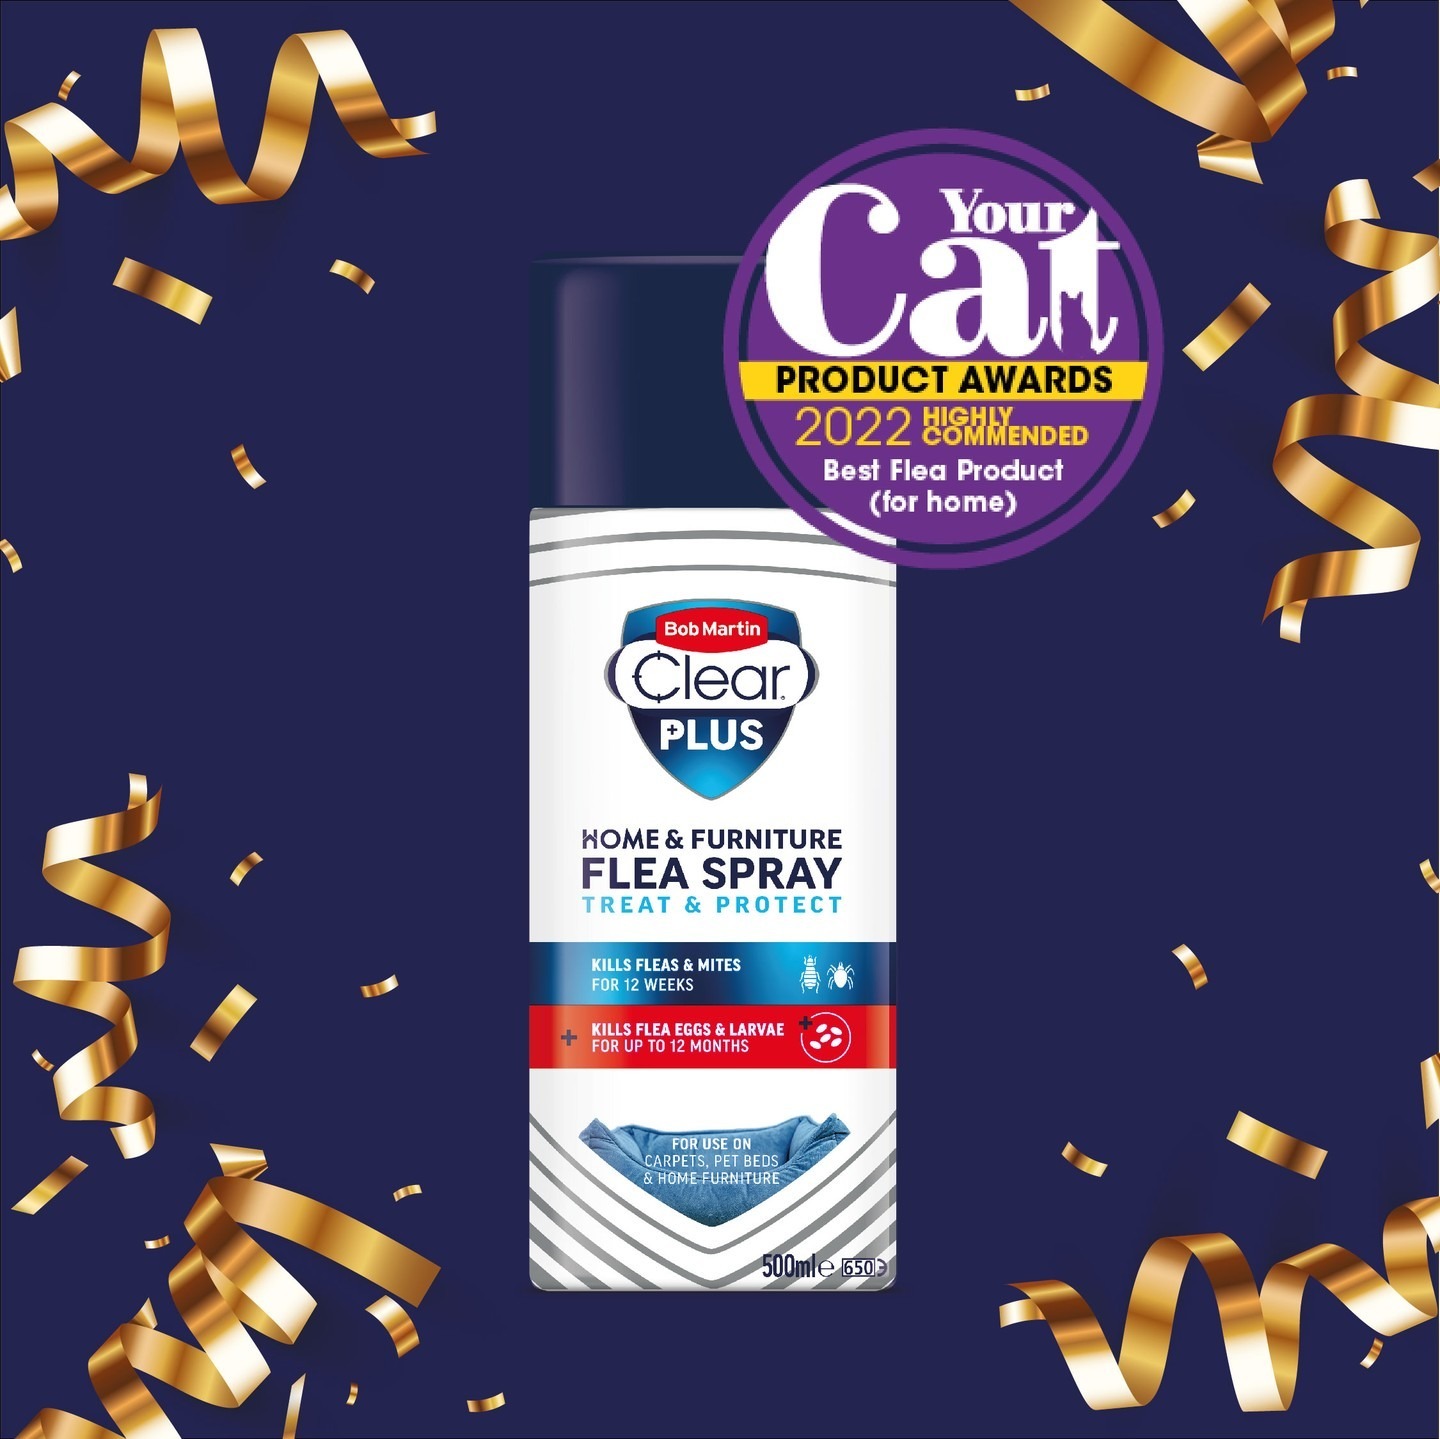 Our Clear Plus Spray has been recognised as a highly commended product in the Your Cat Best Flea Product Award 🙌😺

We want to say a big thank you to everyone who voted for us, it really does mean a lot 💛

 #BobMartin #PetHealthcare #Flea #Worm #Dog #Cat #SpotOn #Pets #PetsOfInstagram #PetCare #PetTips #PetHealth #HealthyPets #ActivePets #award